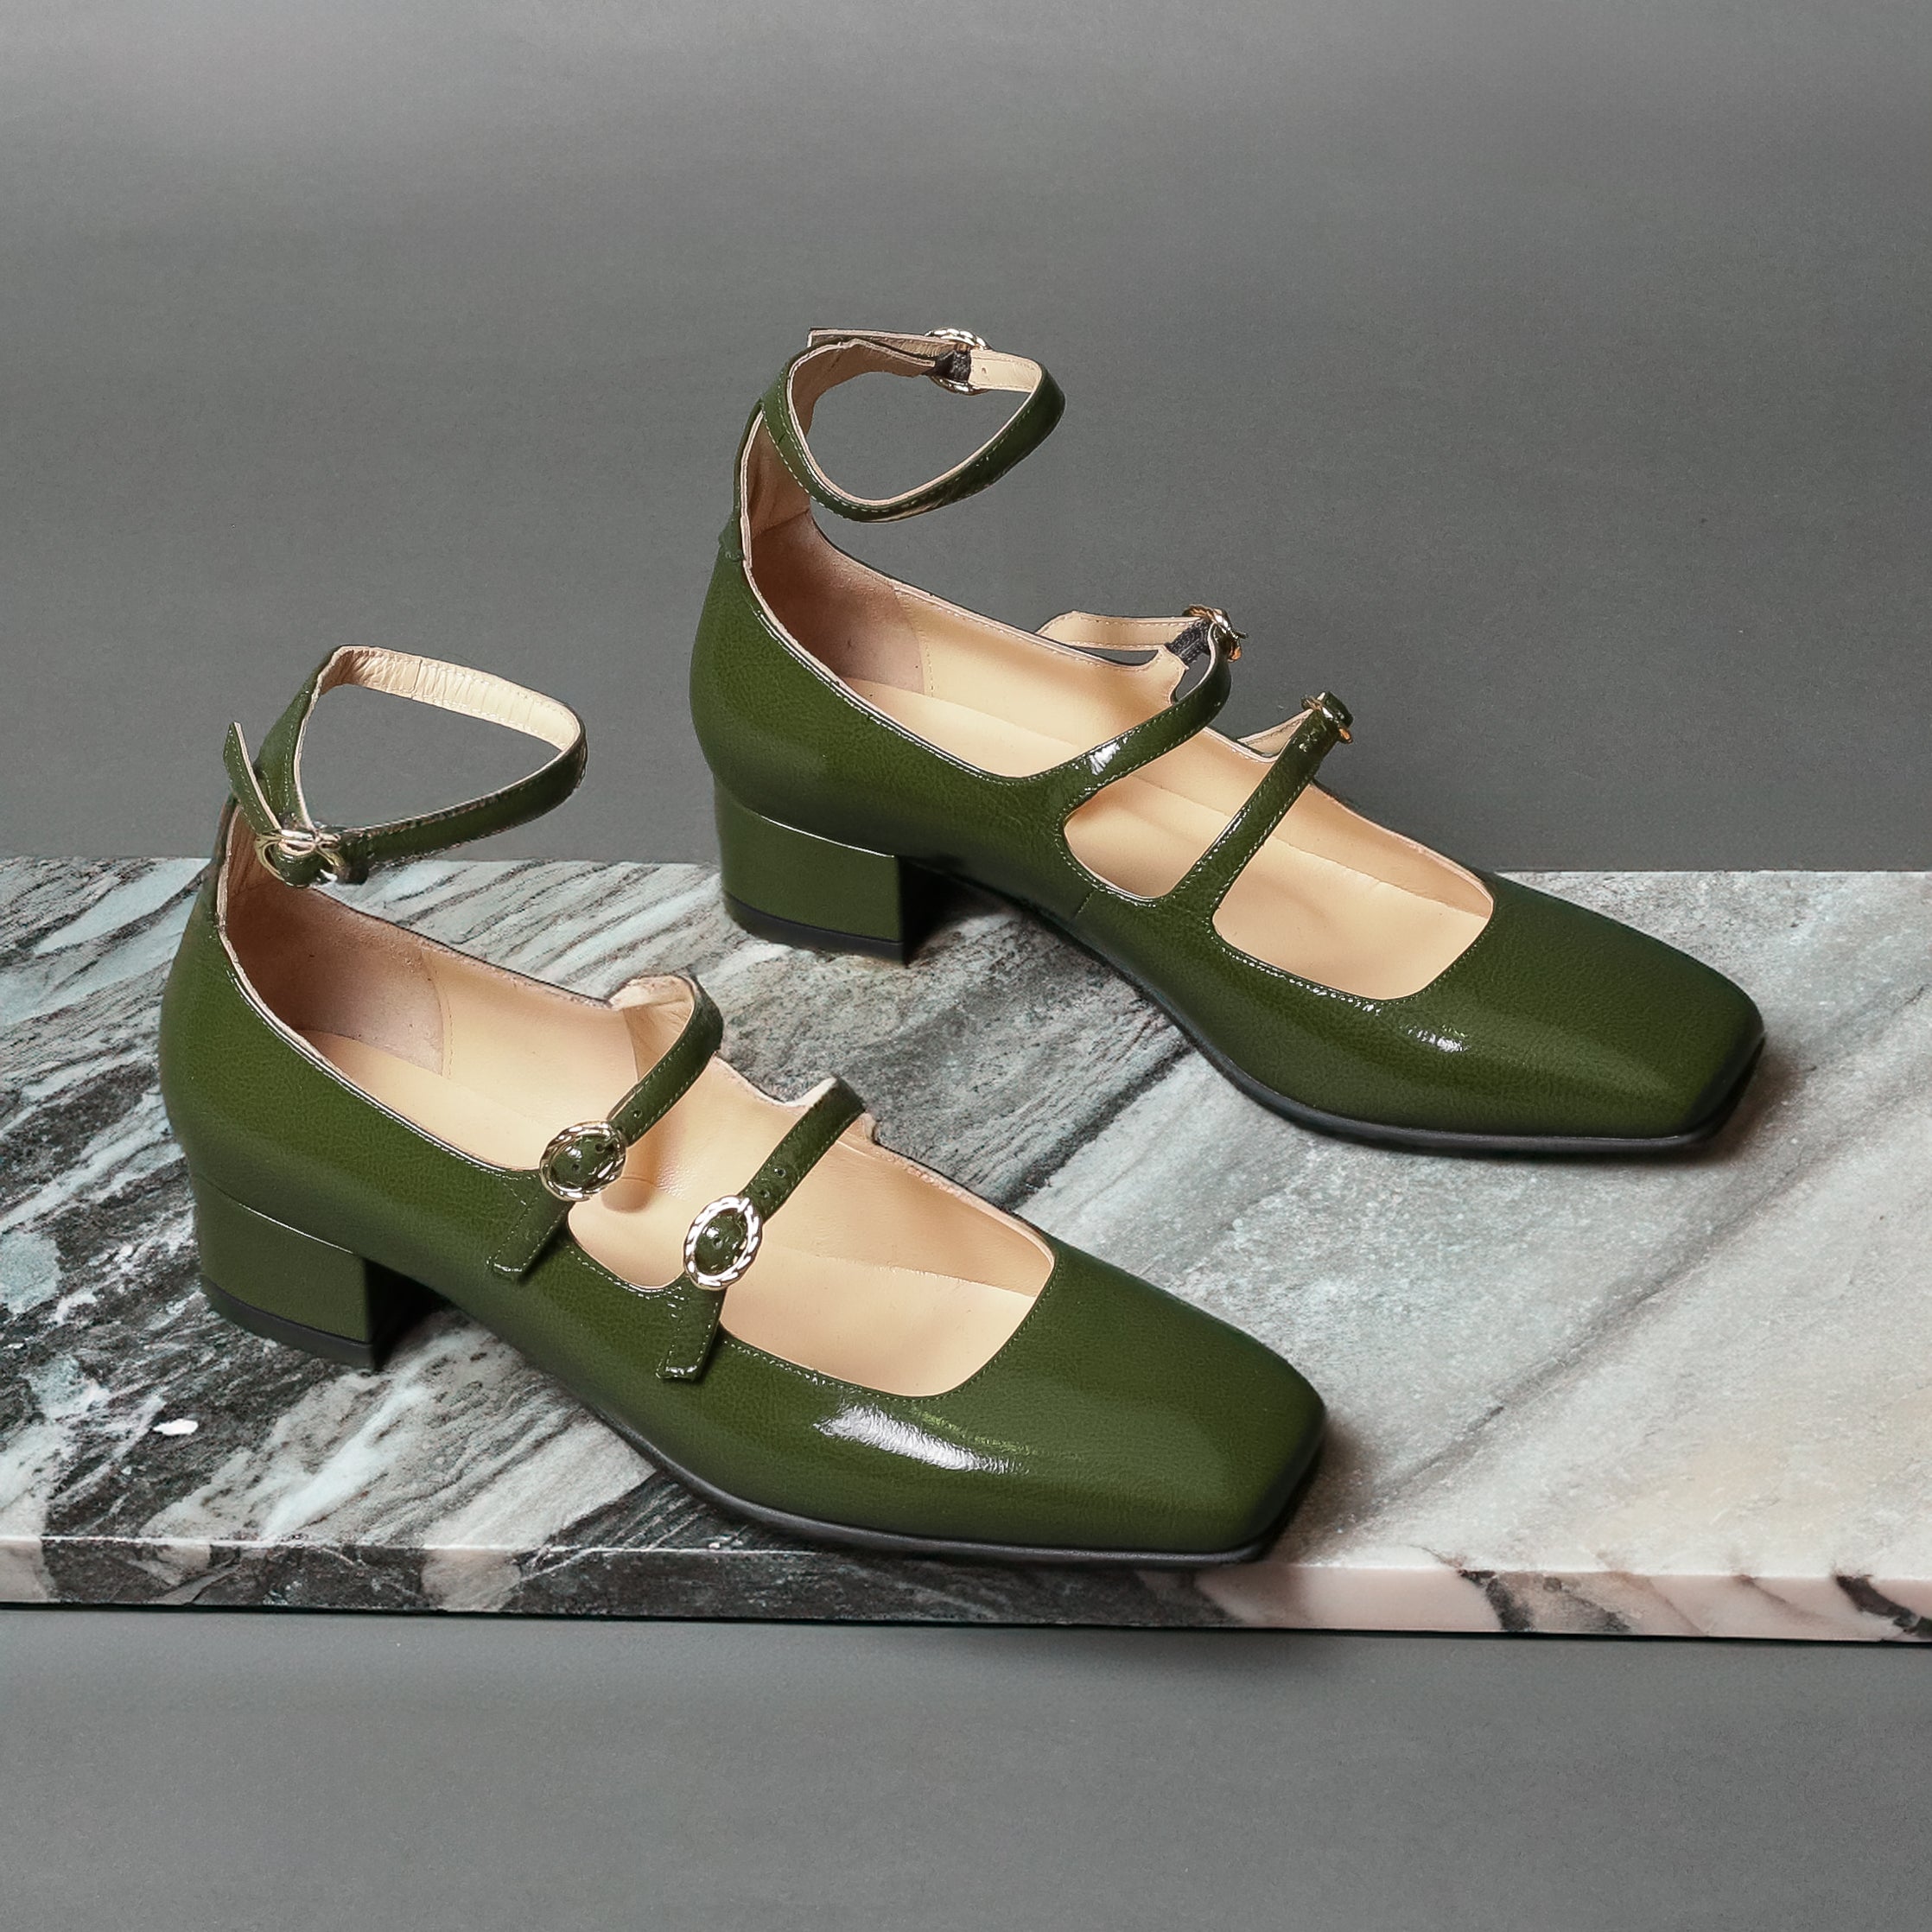 A021 Green - 124 Shoes